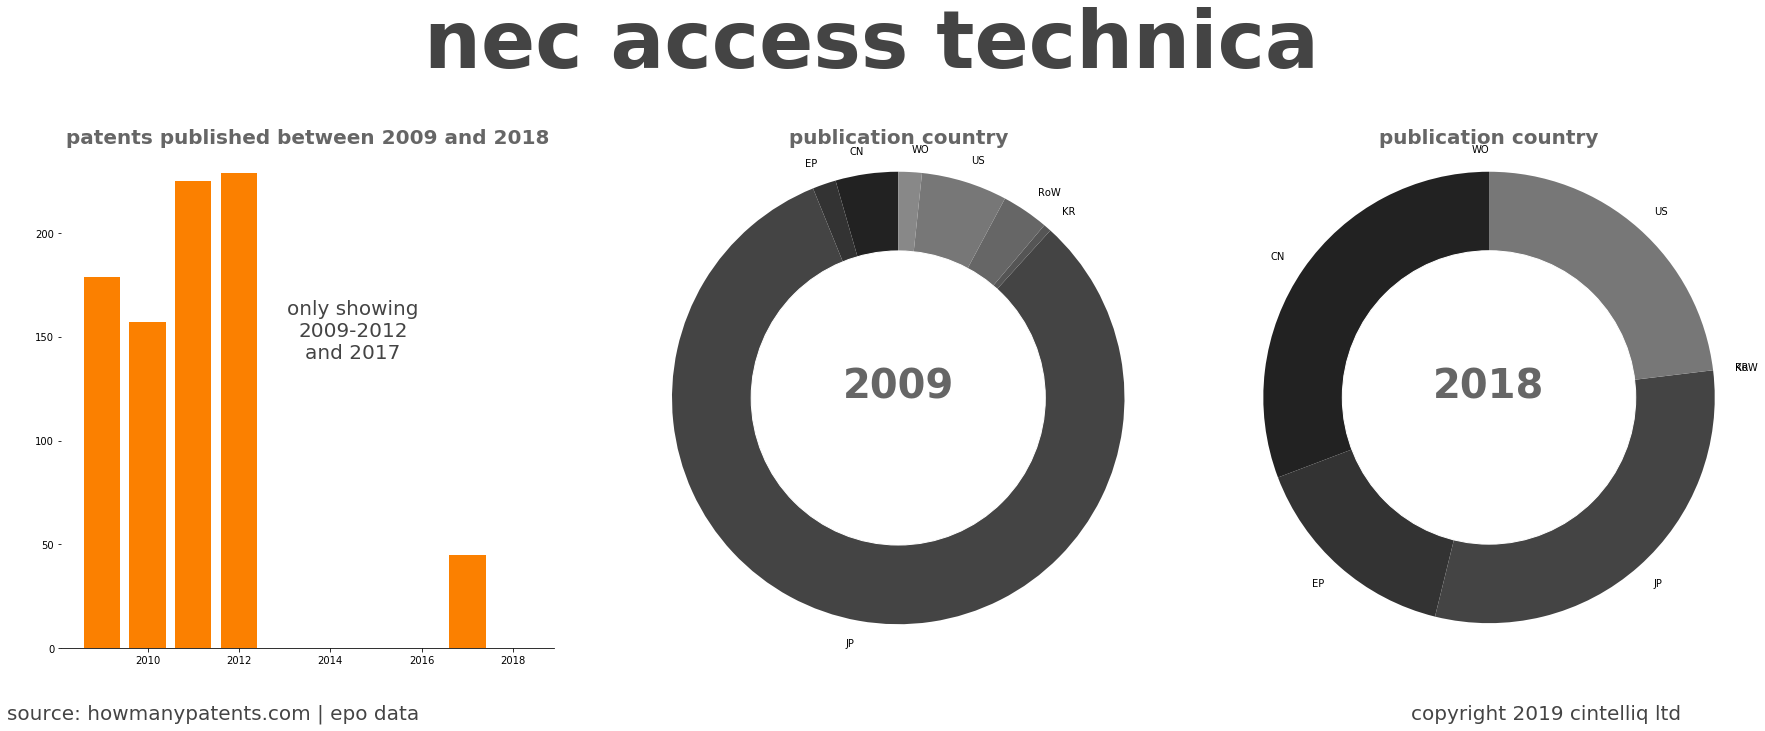 summary of patents for Nec Access Technica